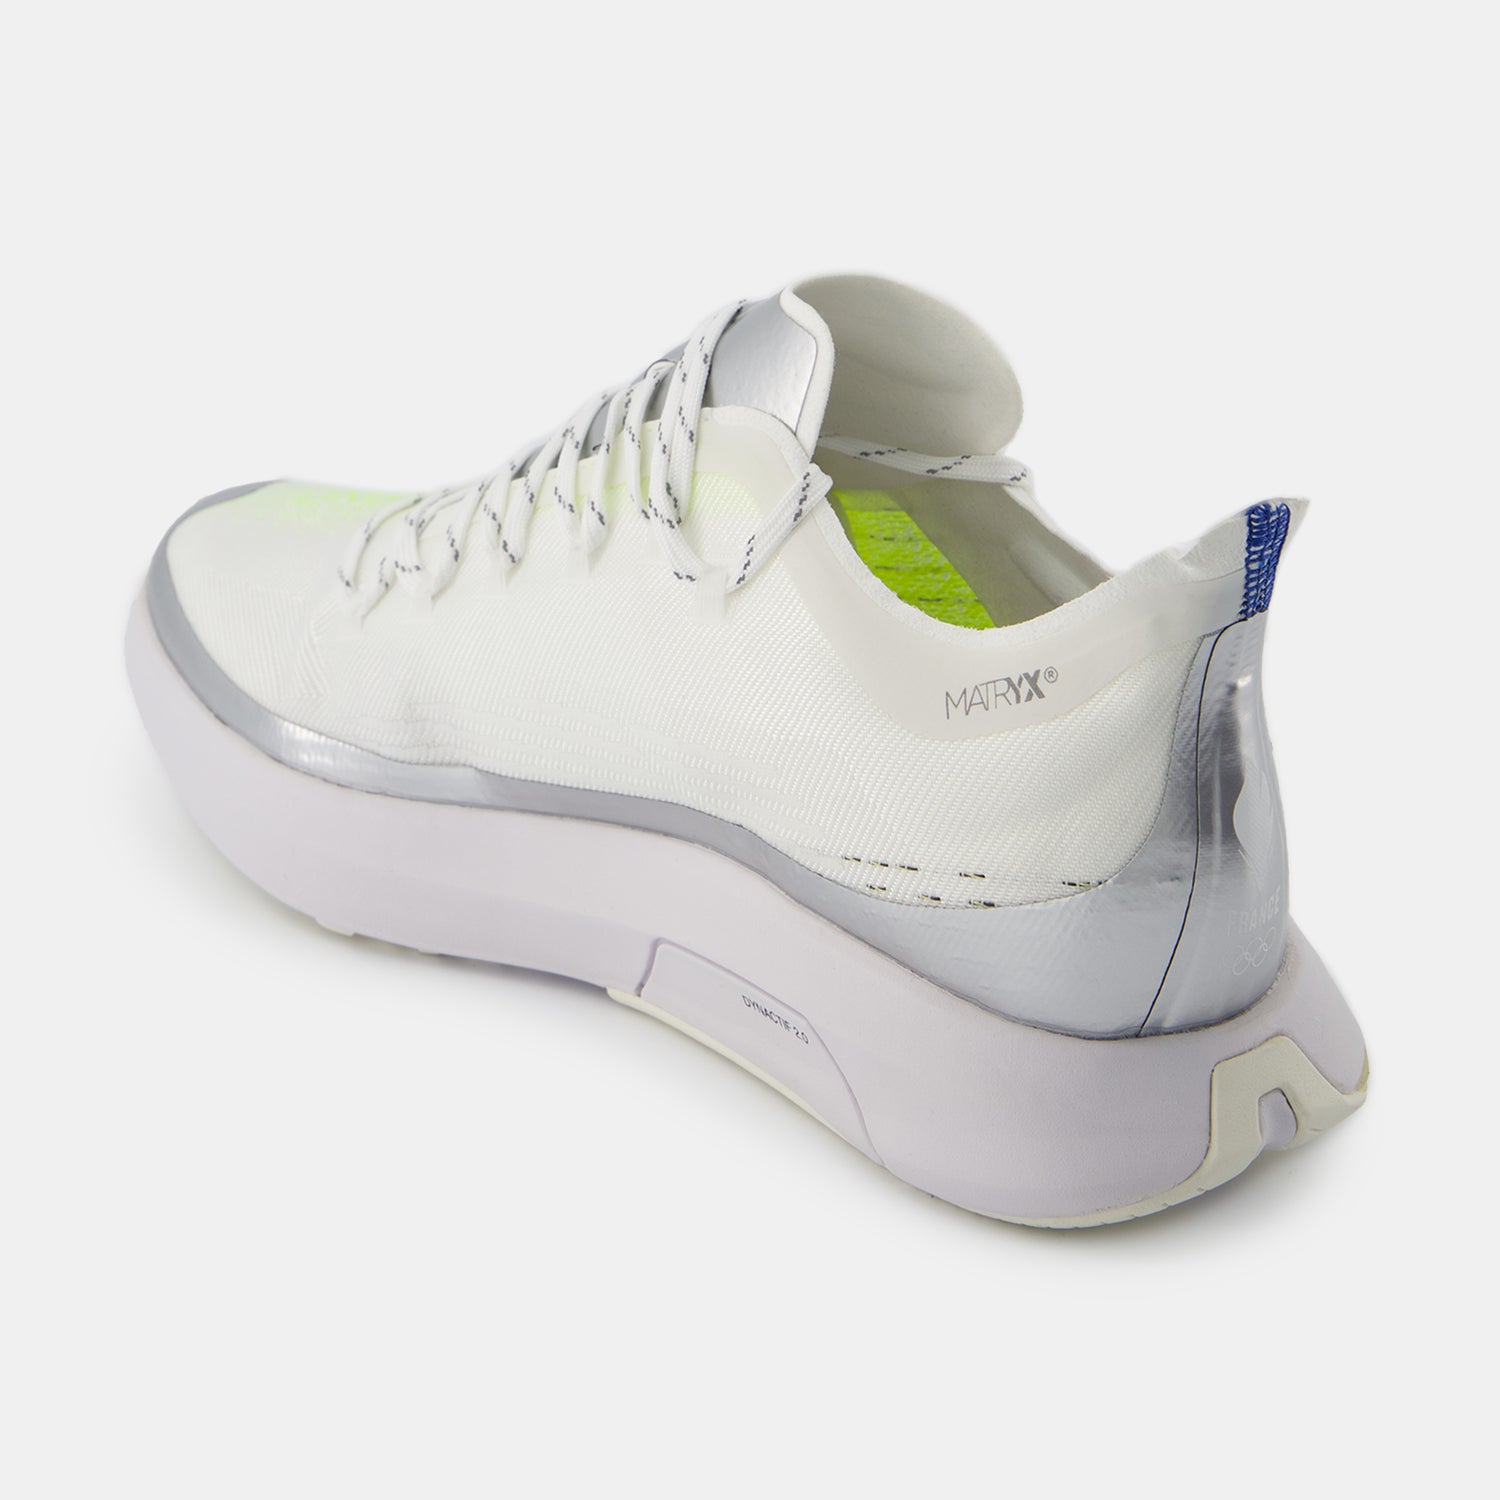 2410399-LCS R2024 EFR OLY optical white/ miror | Chaussures Performance Equipe de France Unisexe